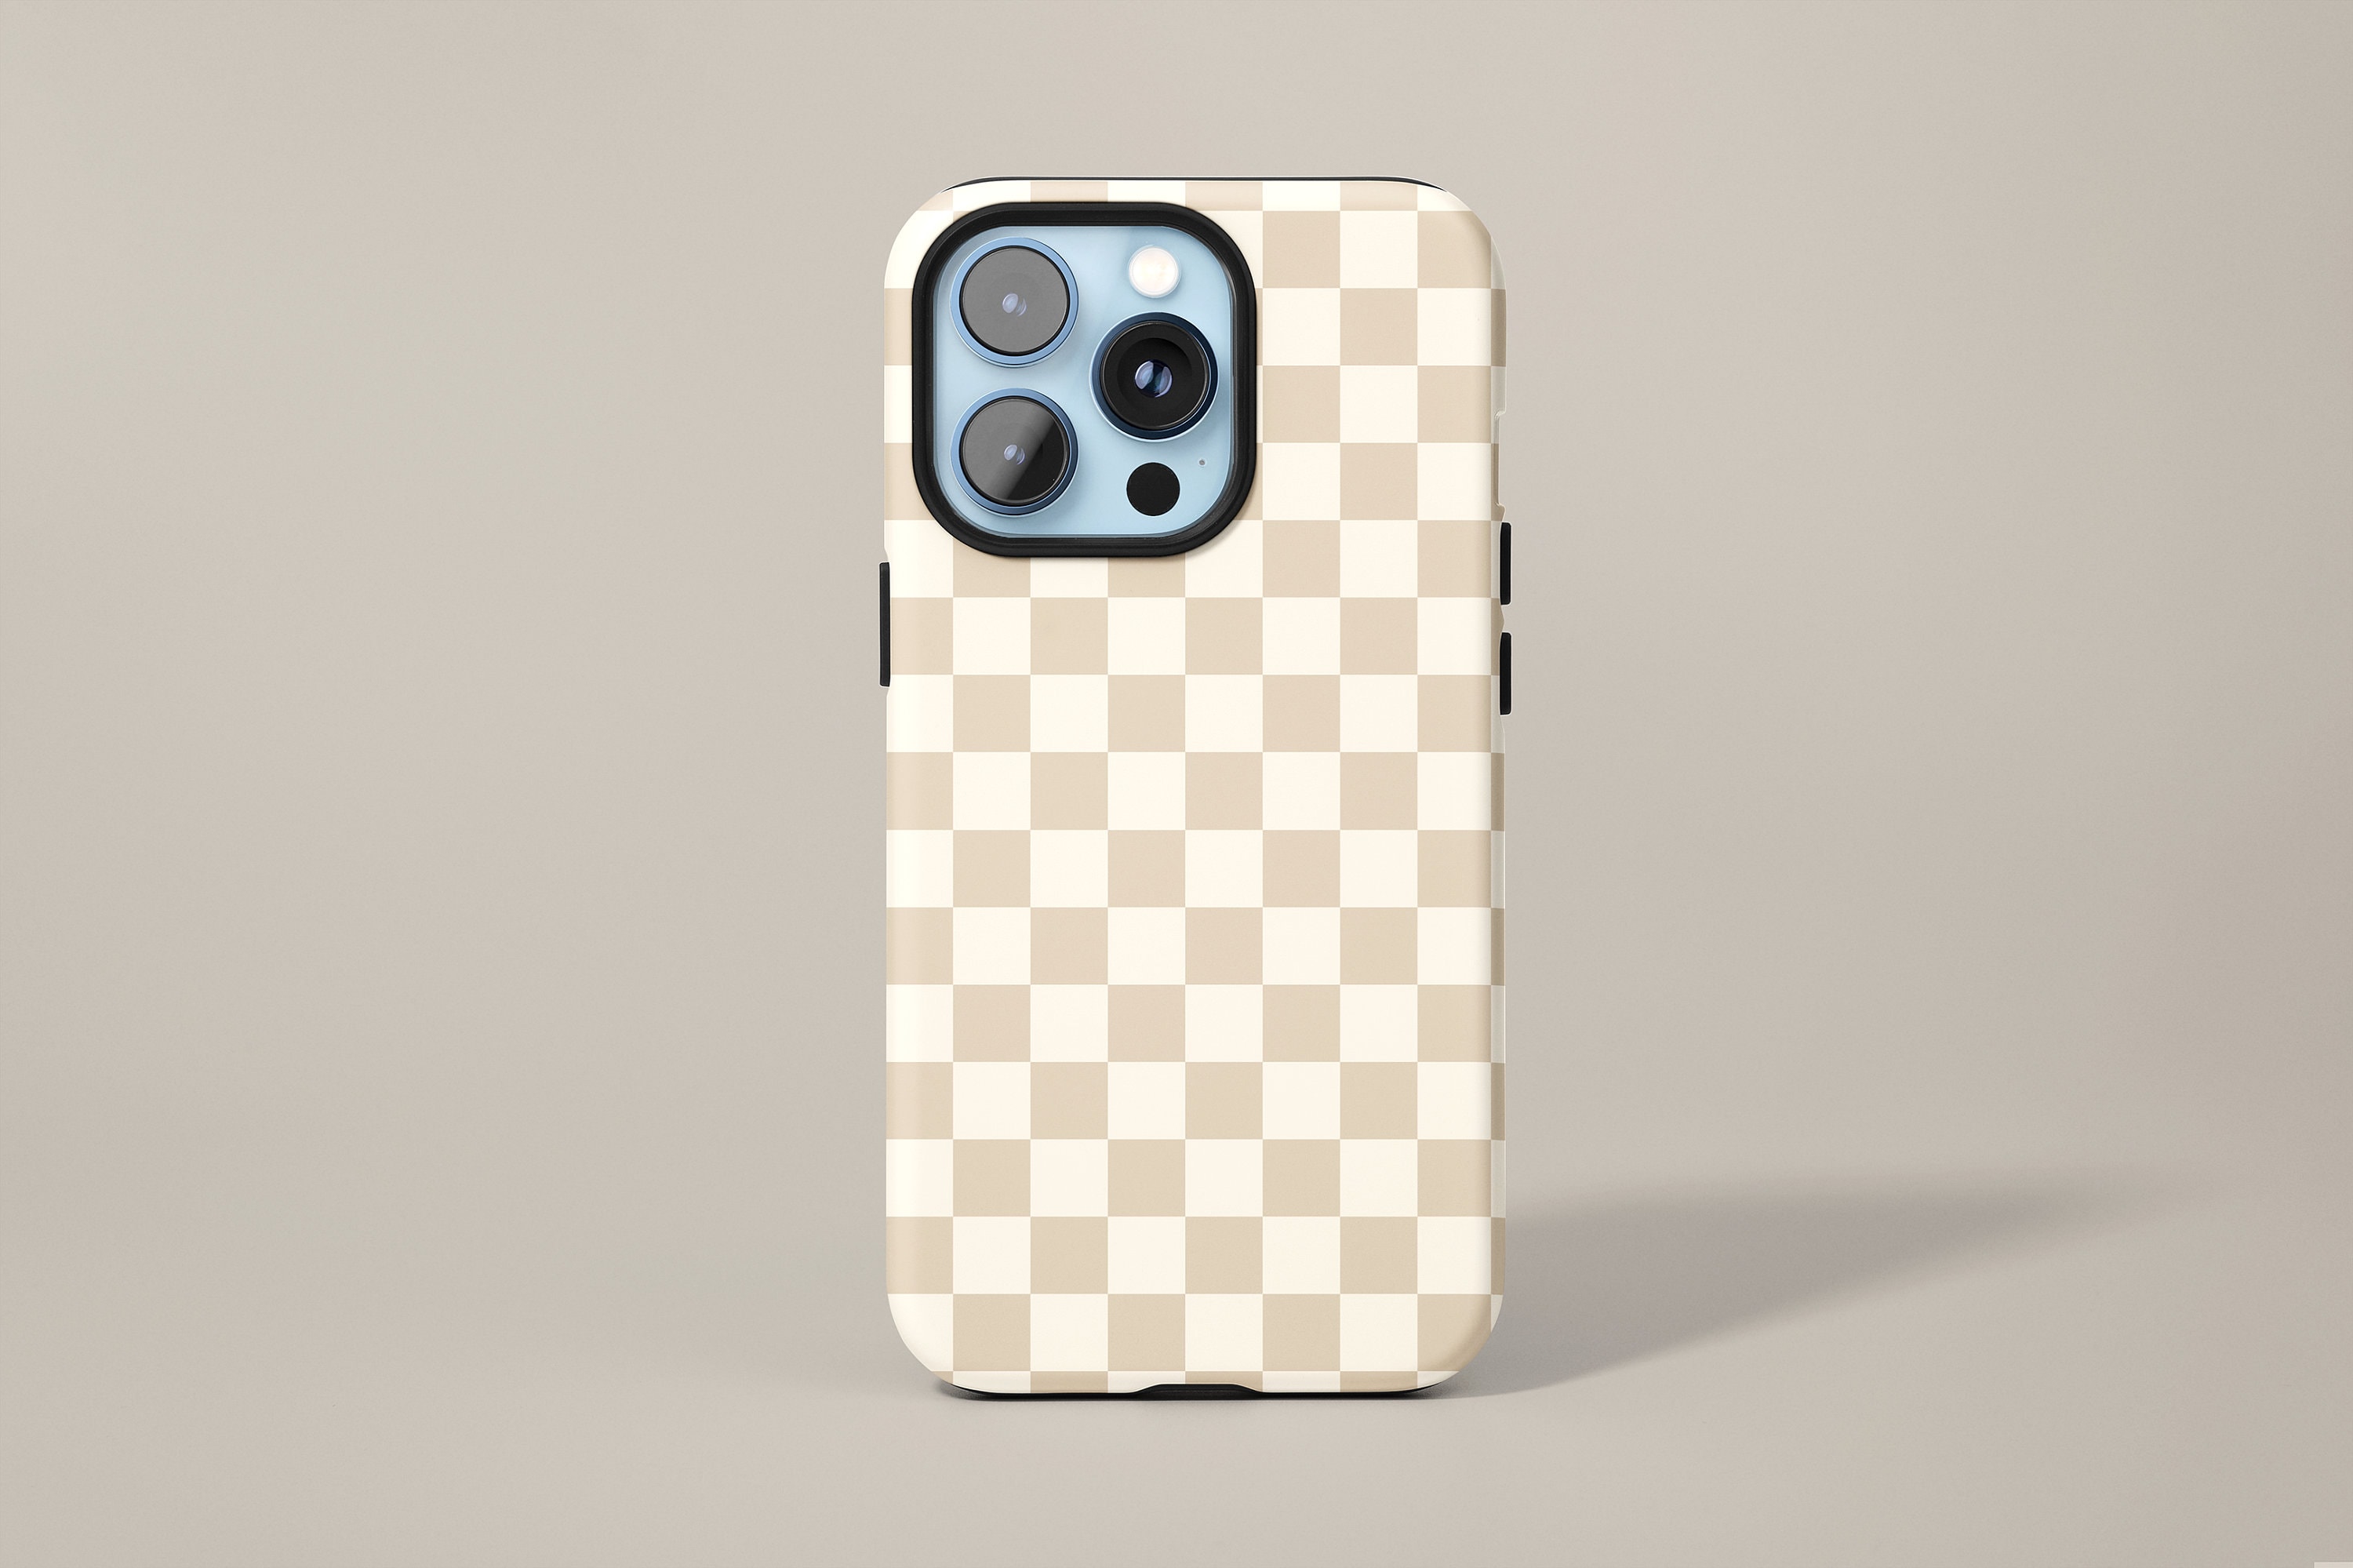 Specialclickshop  LV Brown Checkered Pattern for IPhone and Galaxy